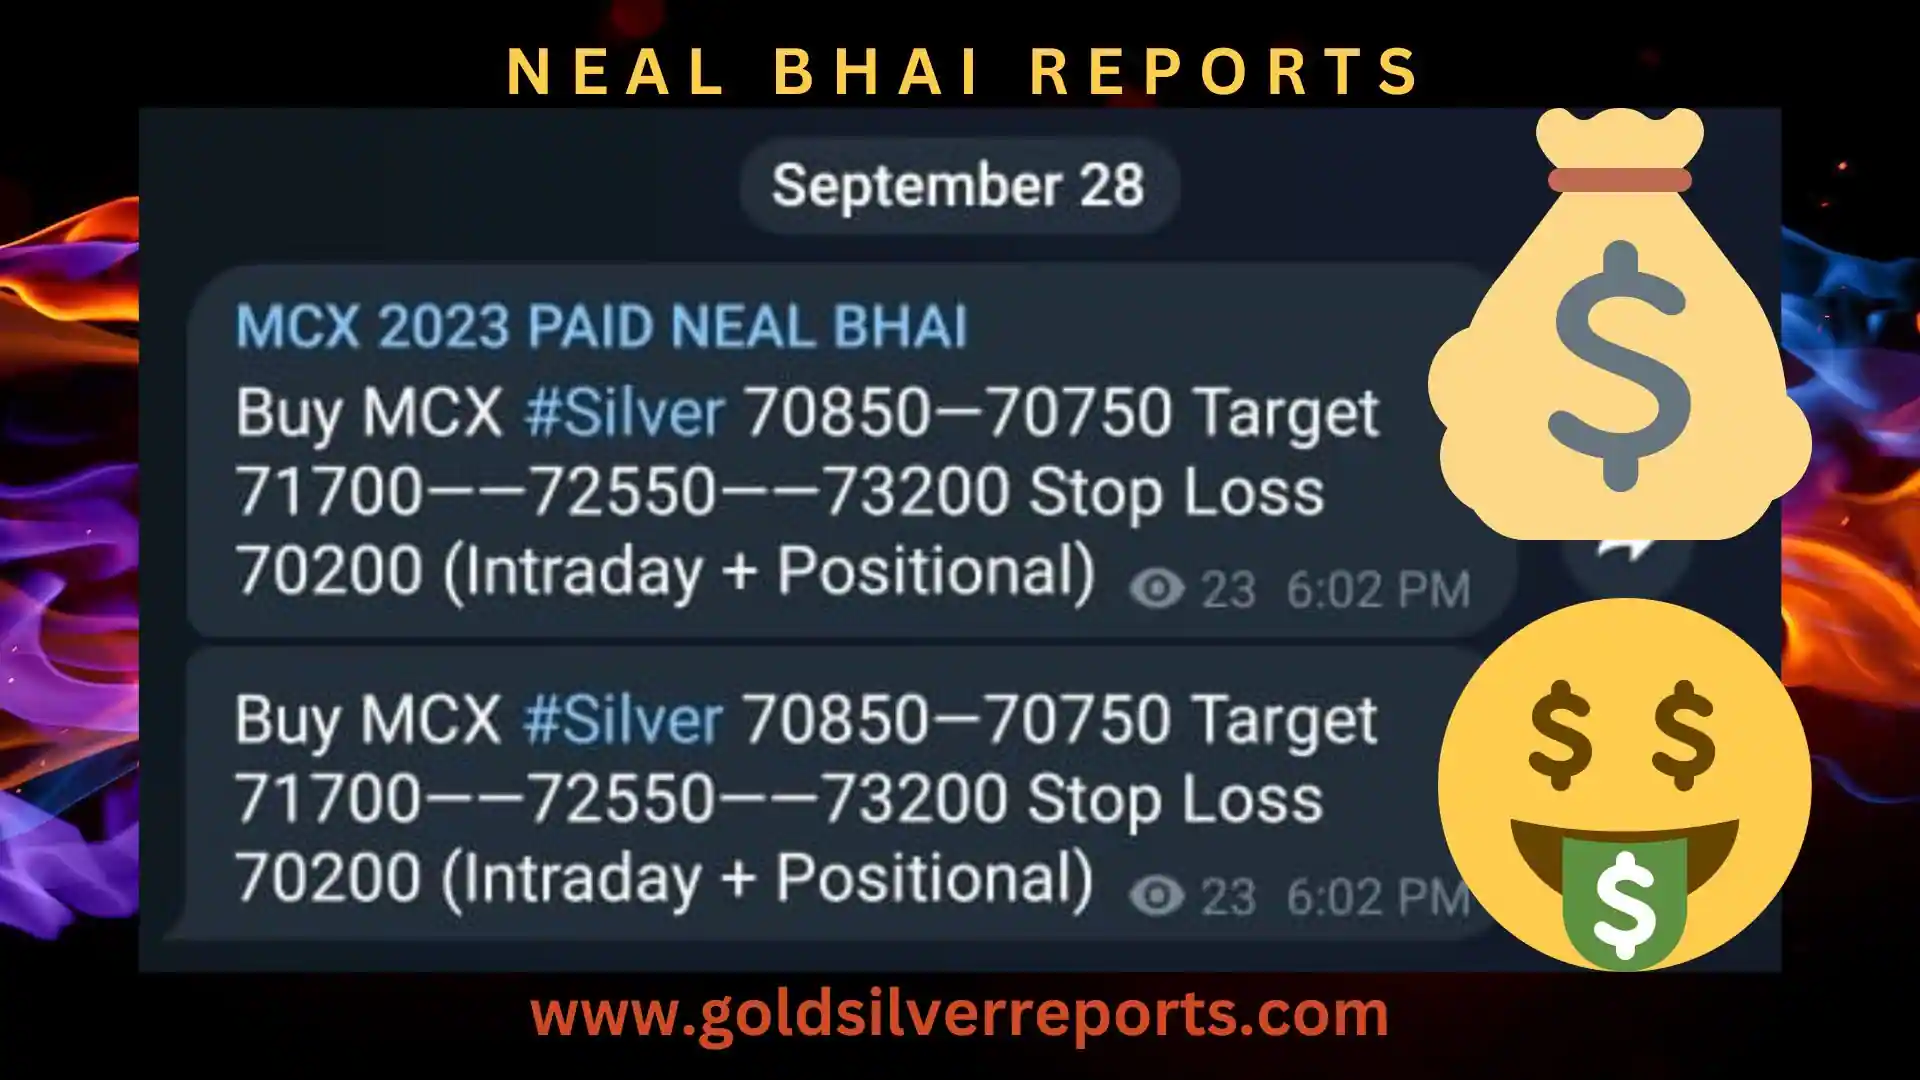 As Expected MCX Silver Blast 70750 To 73227, Profit Rs. 74500 Per Lot